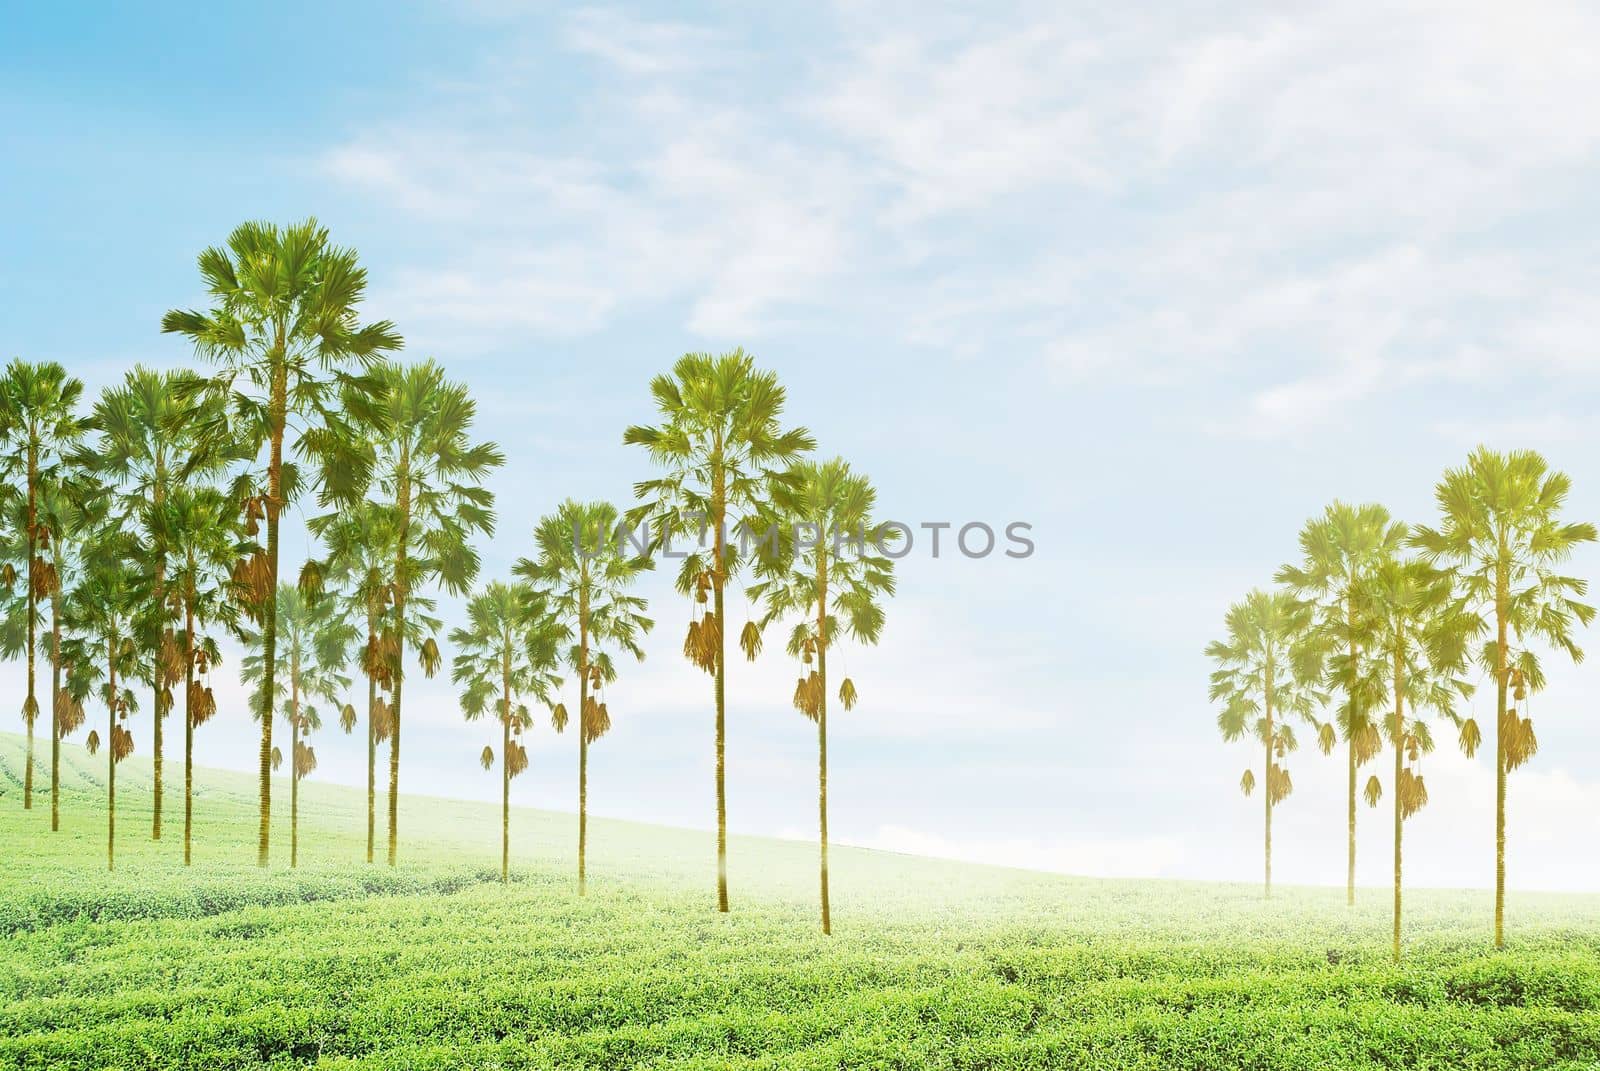 plam trees with green field and yellow soft lighting that right side